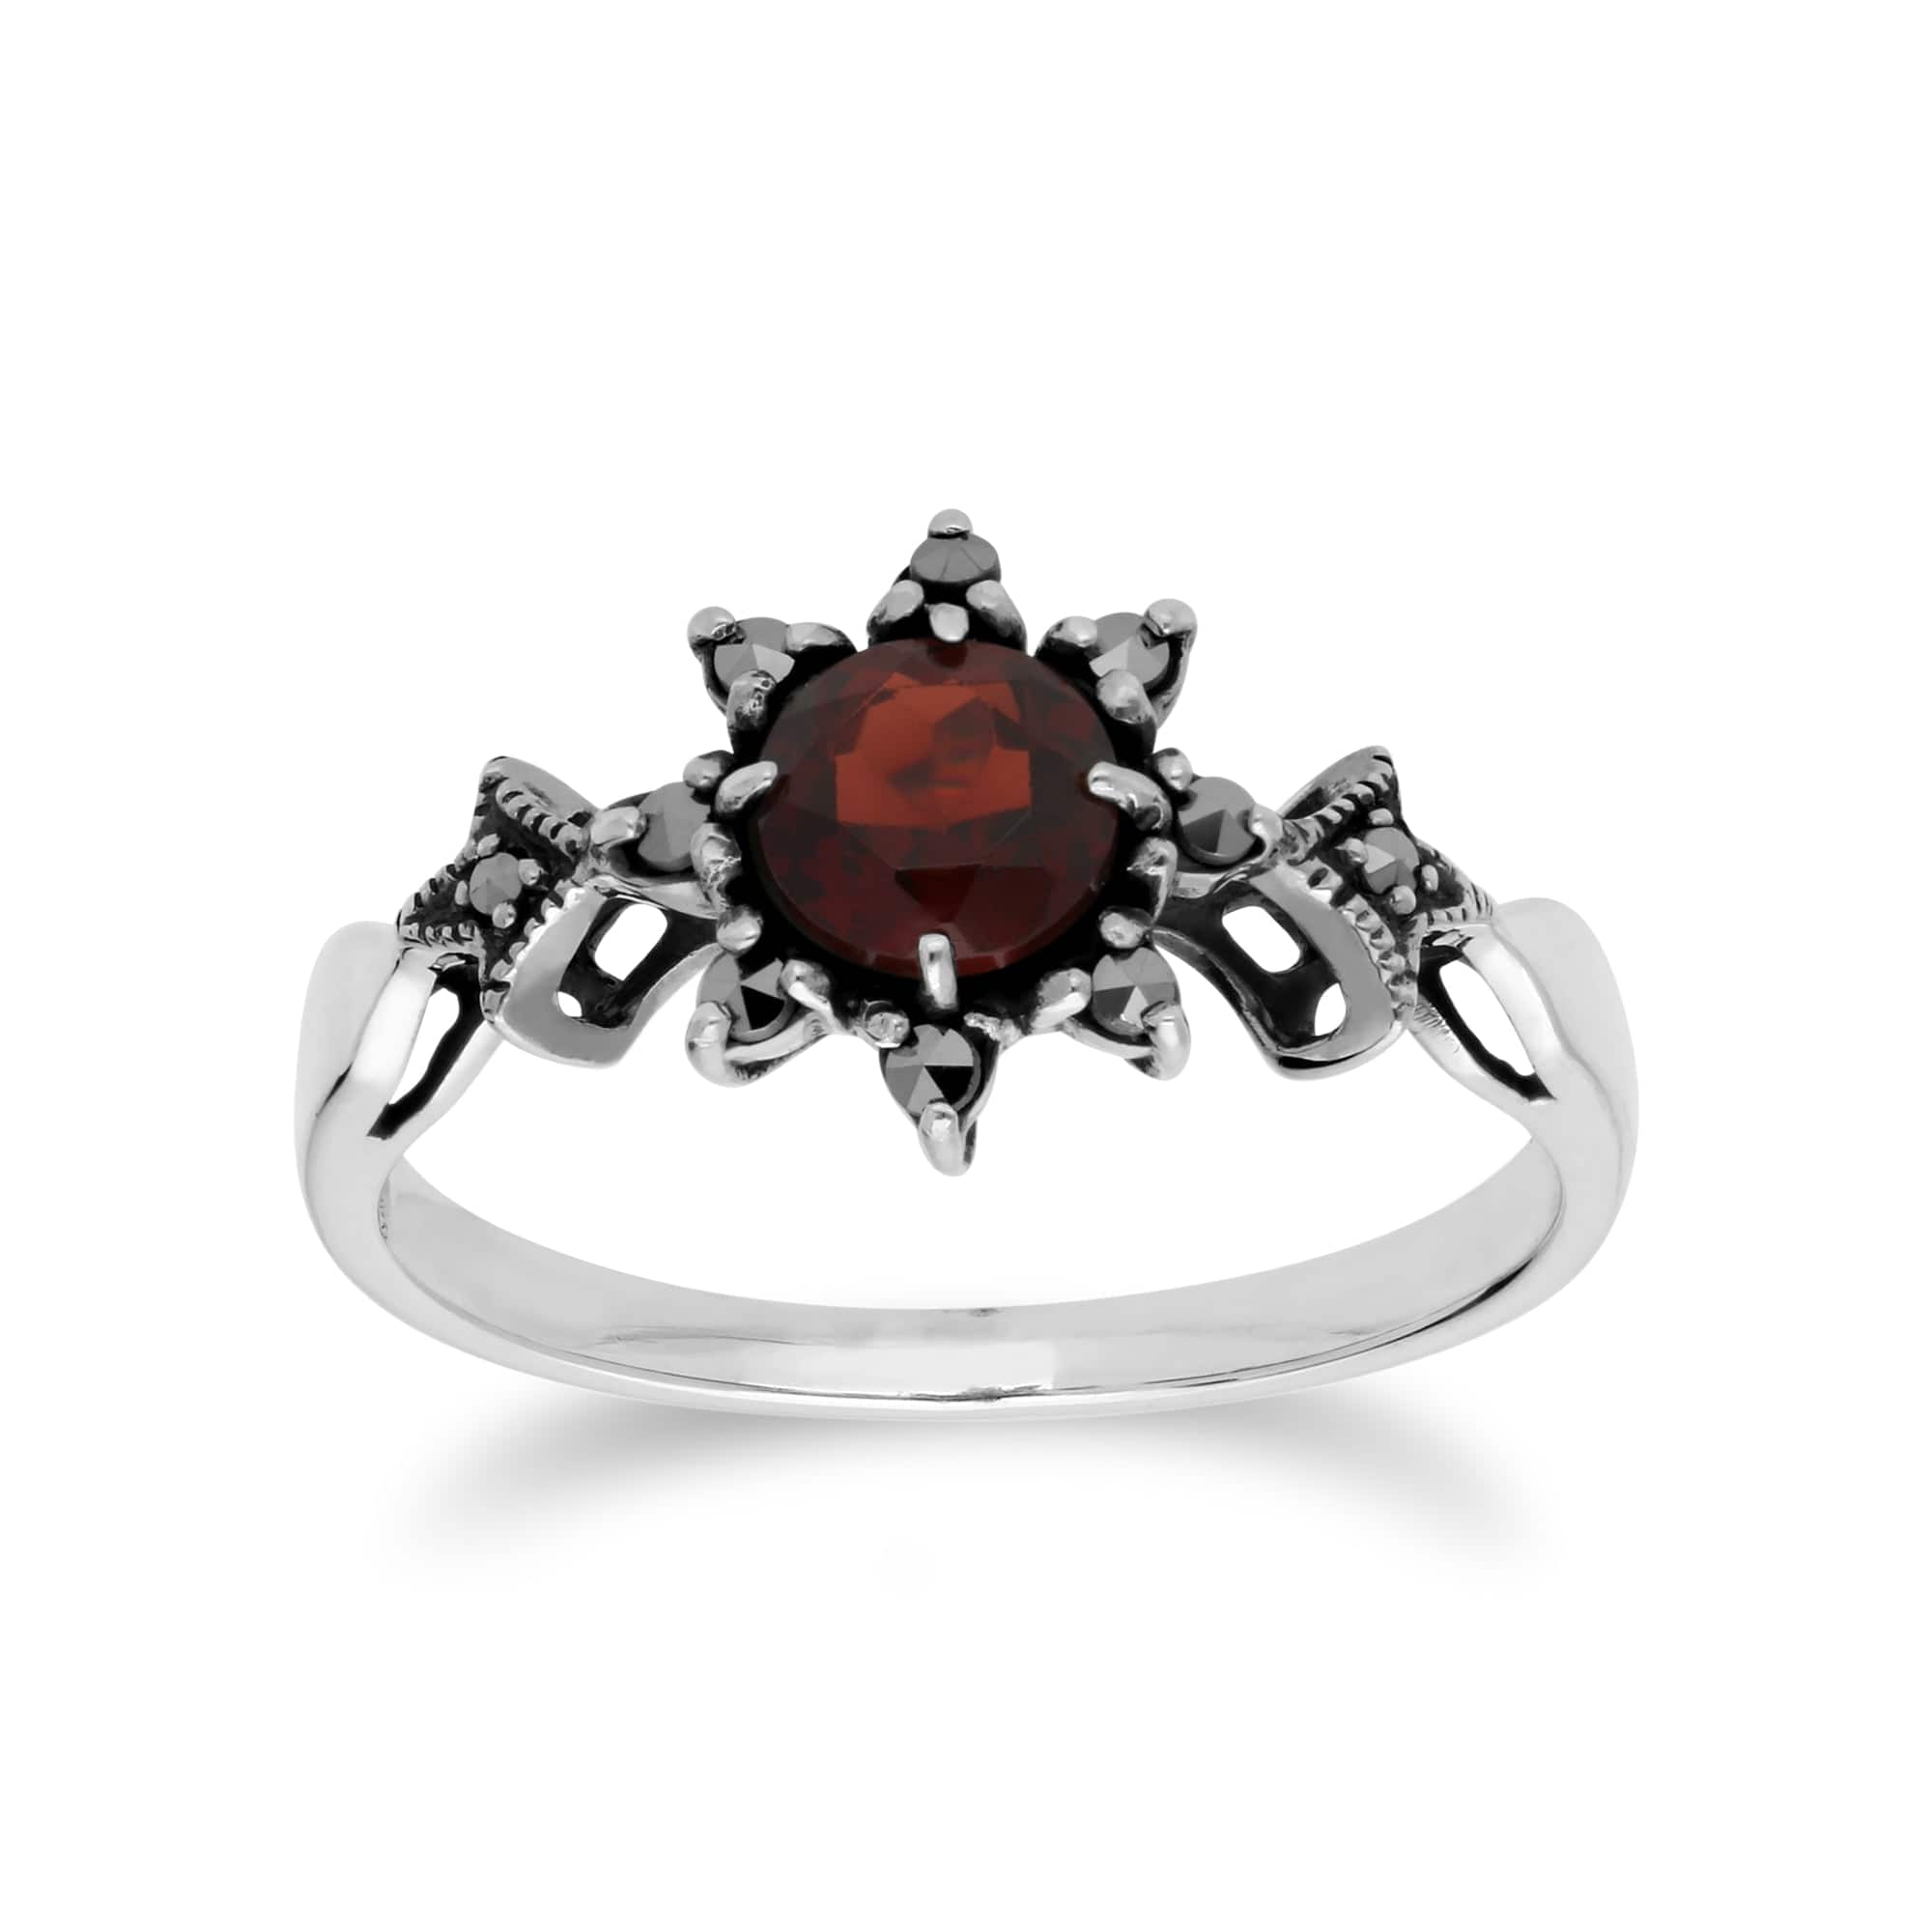 214R599503925 Art Deco Style Round Garnet & Marcasite Floral Ring in 925 Sterling Silver 1